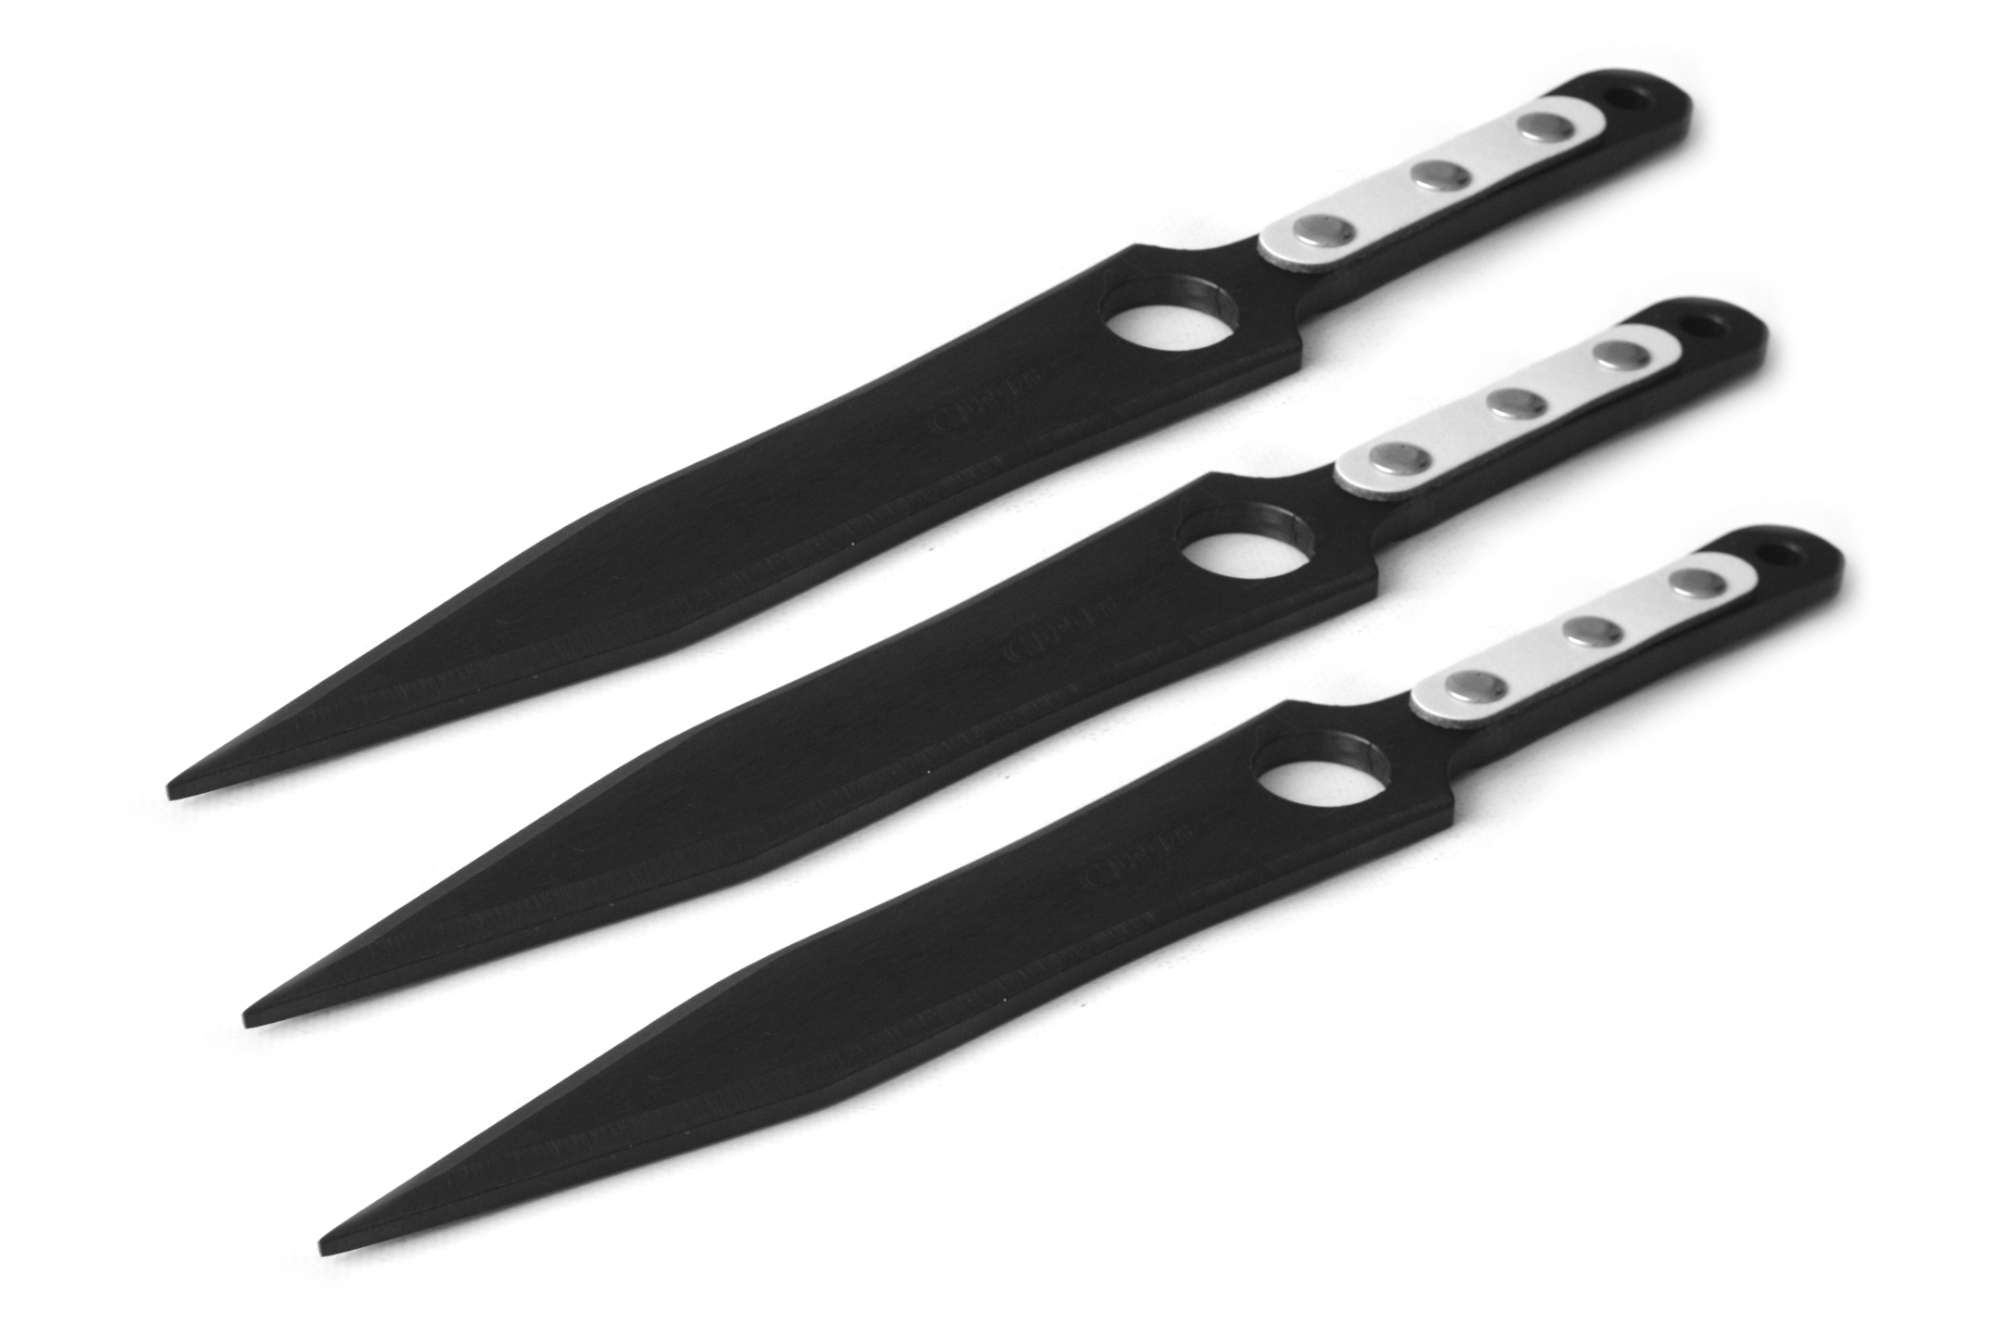 ACEJET MAXIMUS SHADOW - Spinner Throwing knife - set of 3